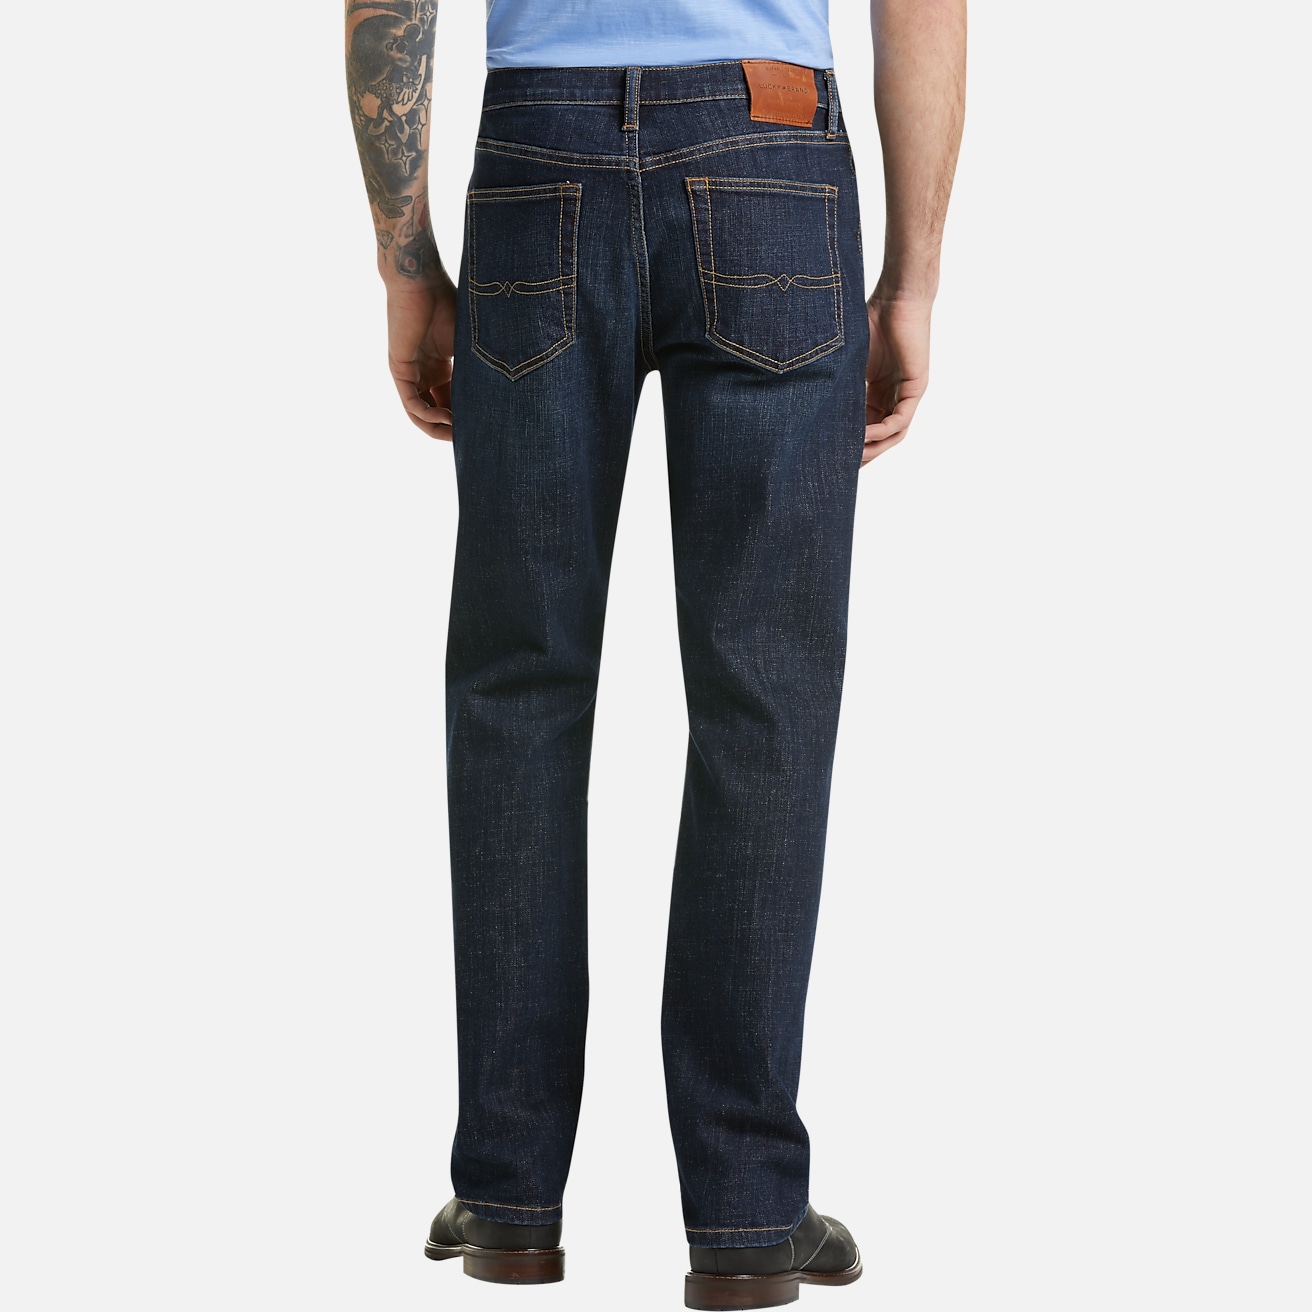 Lucky Brand 329 Shoreline Classic Fit Jeans, All Sale